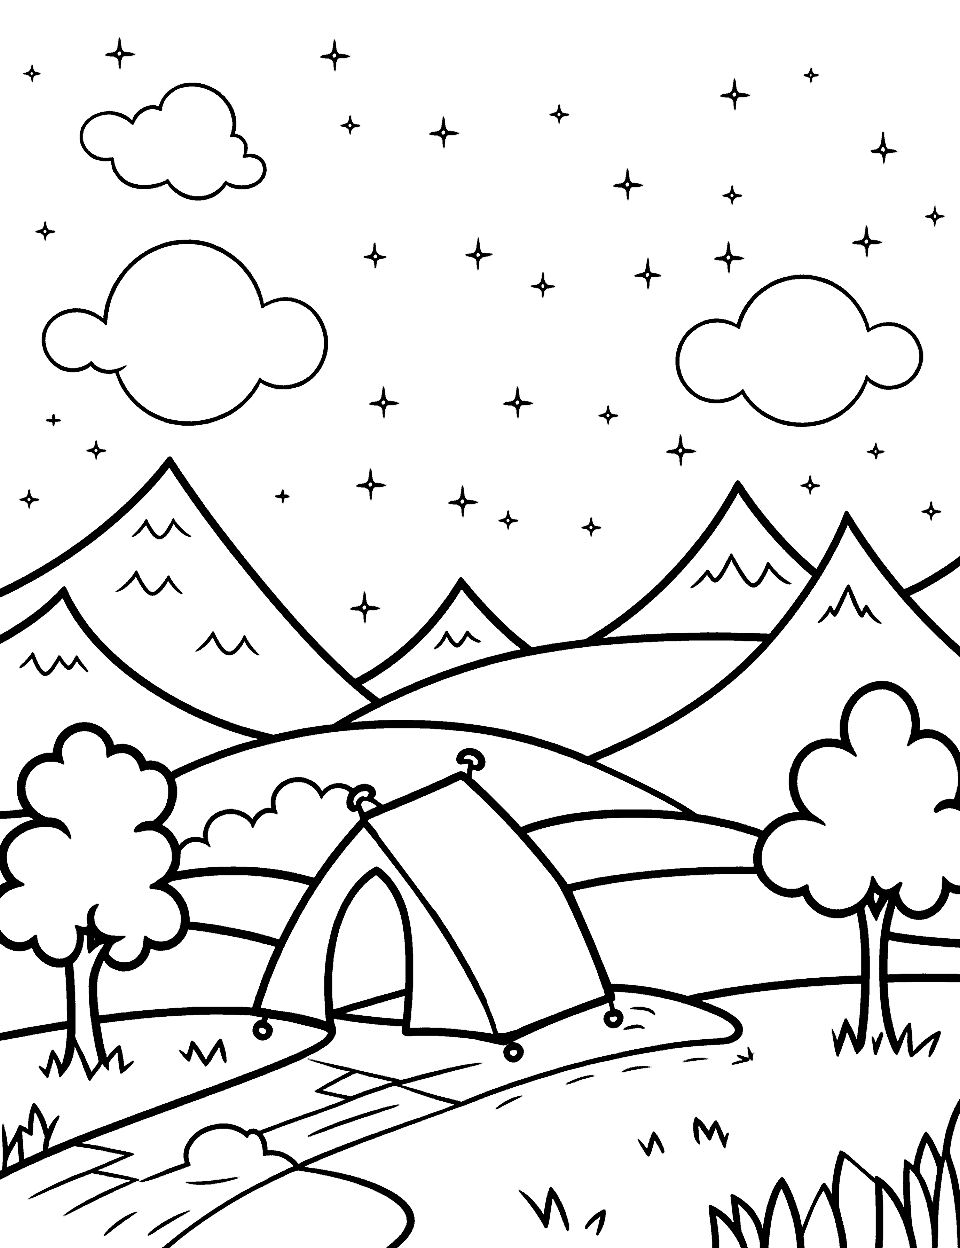 Starry Night Camping Scene Coloring Page - A tent set up under a sky full of stars in the wilderness.